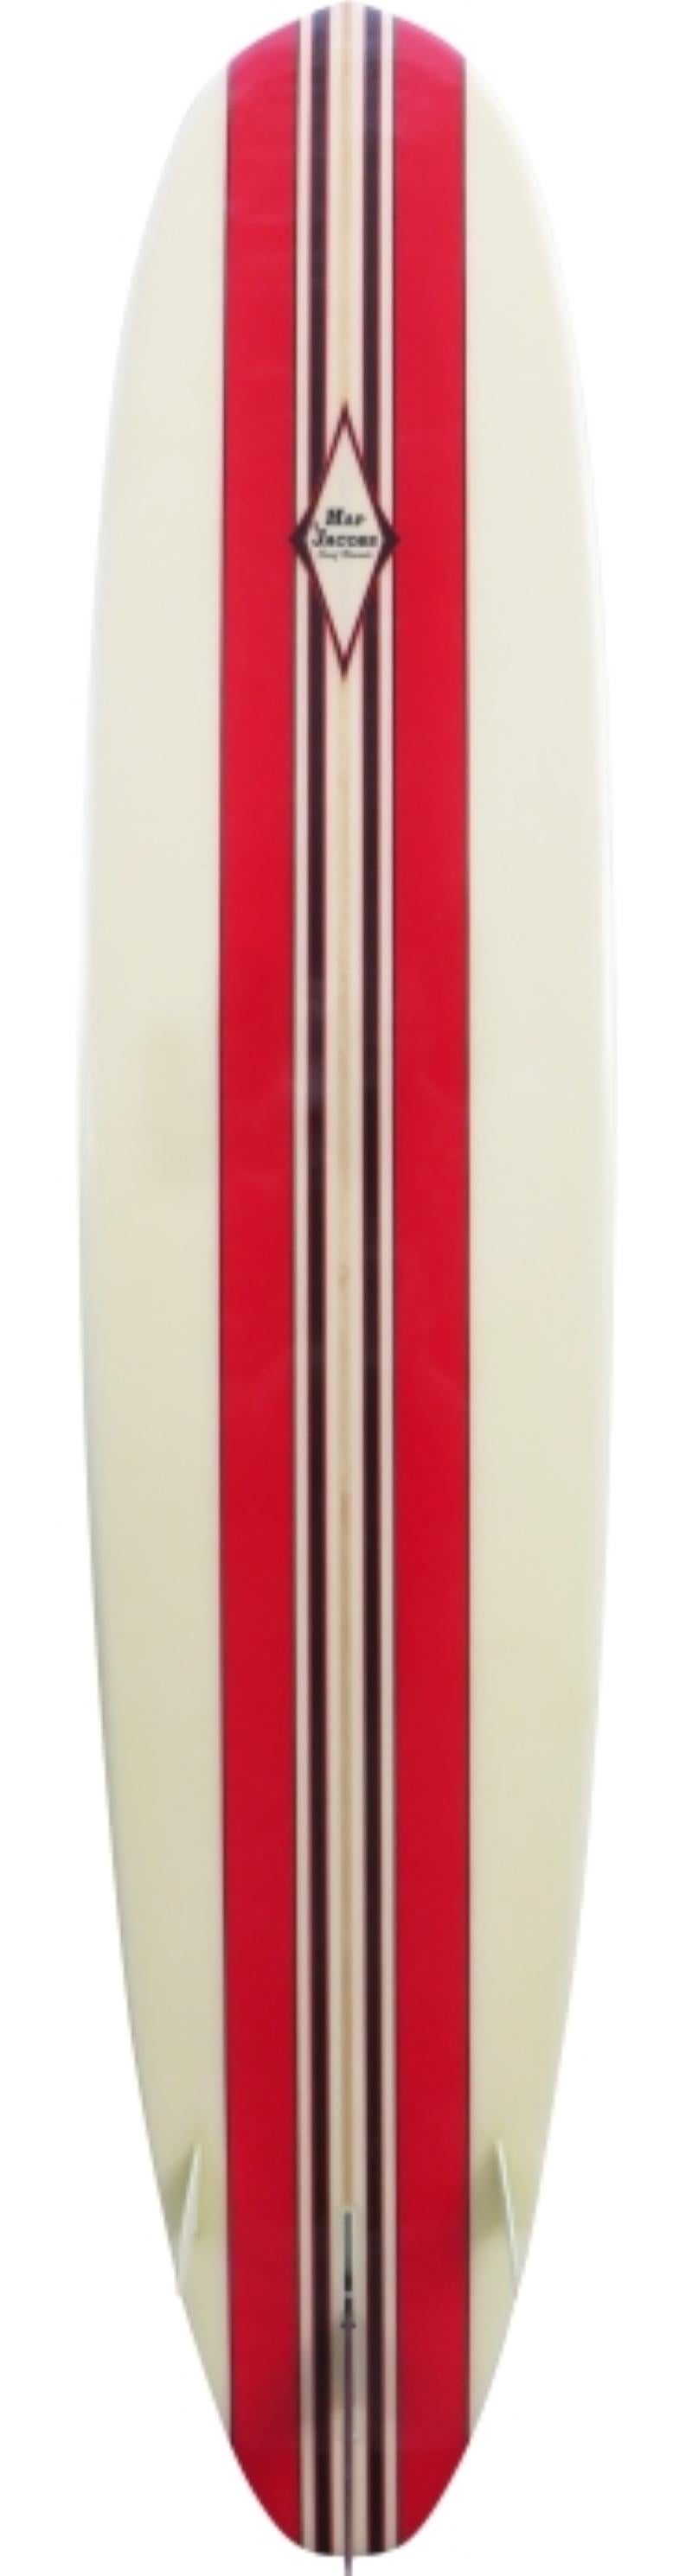 Collectible Hap Jacobs Classic longboard. Features beautiful red panels and black stripes with box single fin and side trailing fins. Shaped and signed by the legendary Hap Jacobs. A superb example of a Classic Hap Jacobs longboard surfboard in all